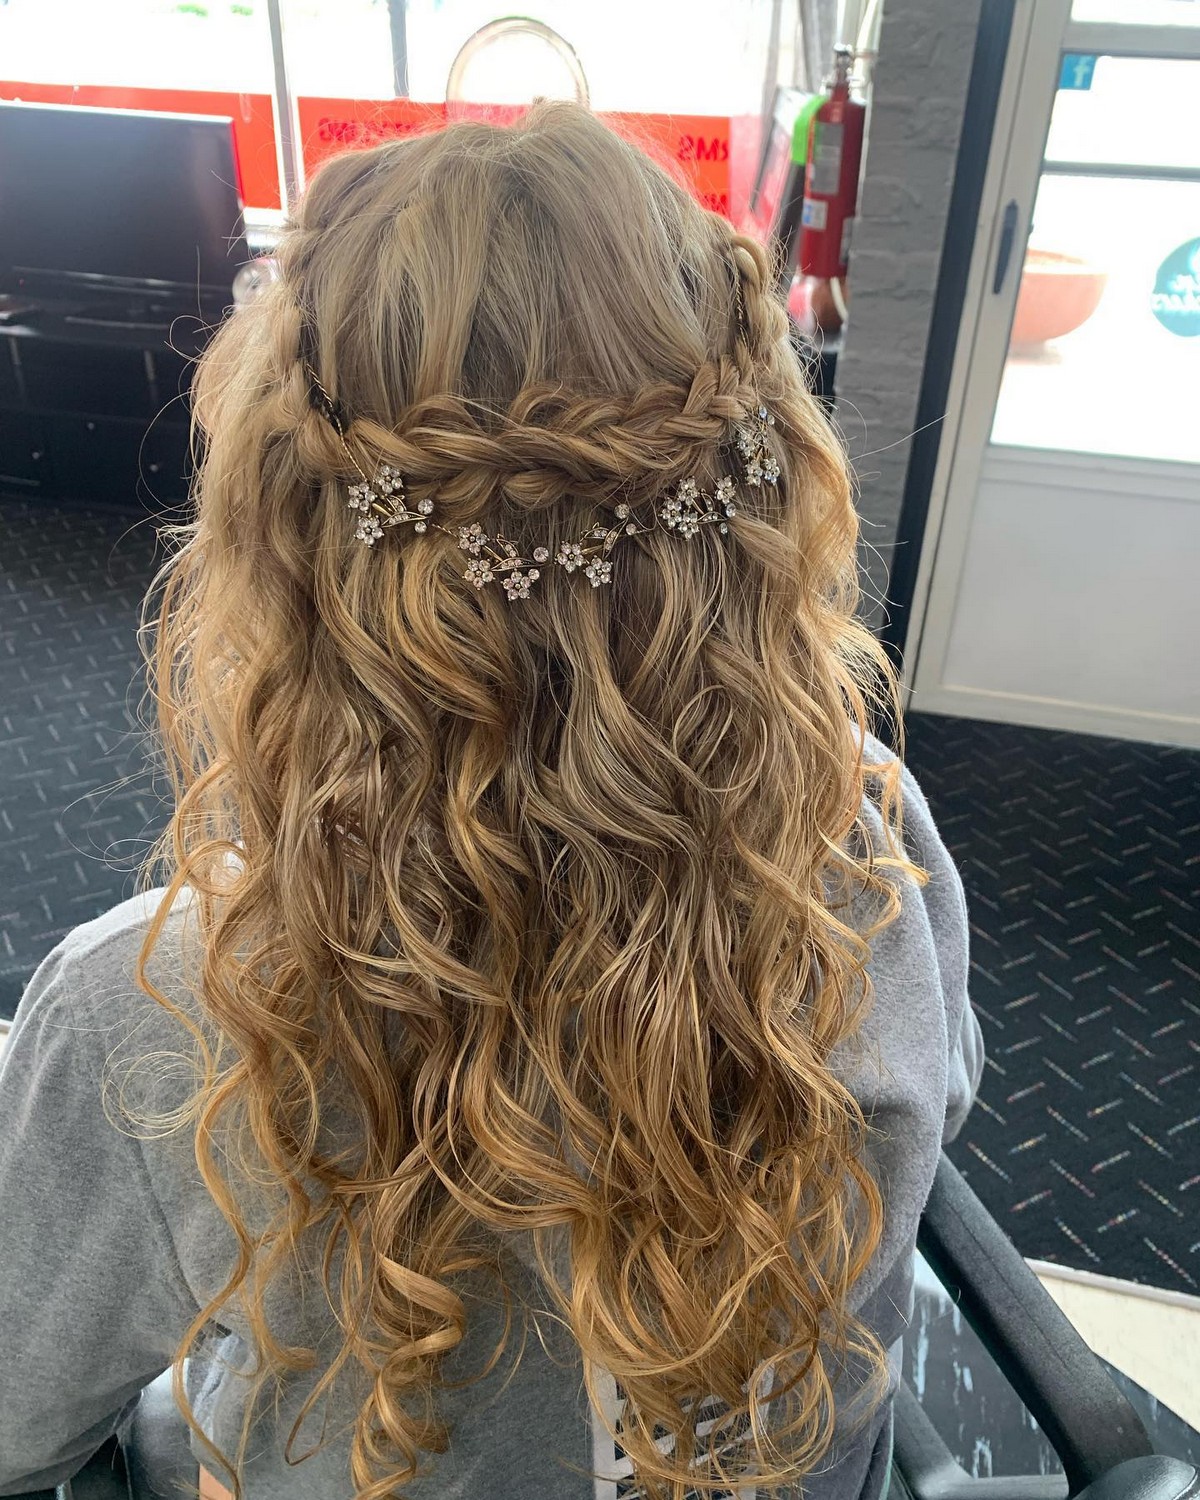 Braided Crown With Loose Curls